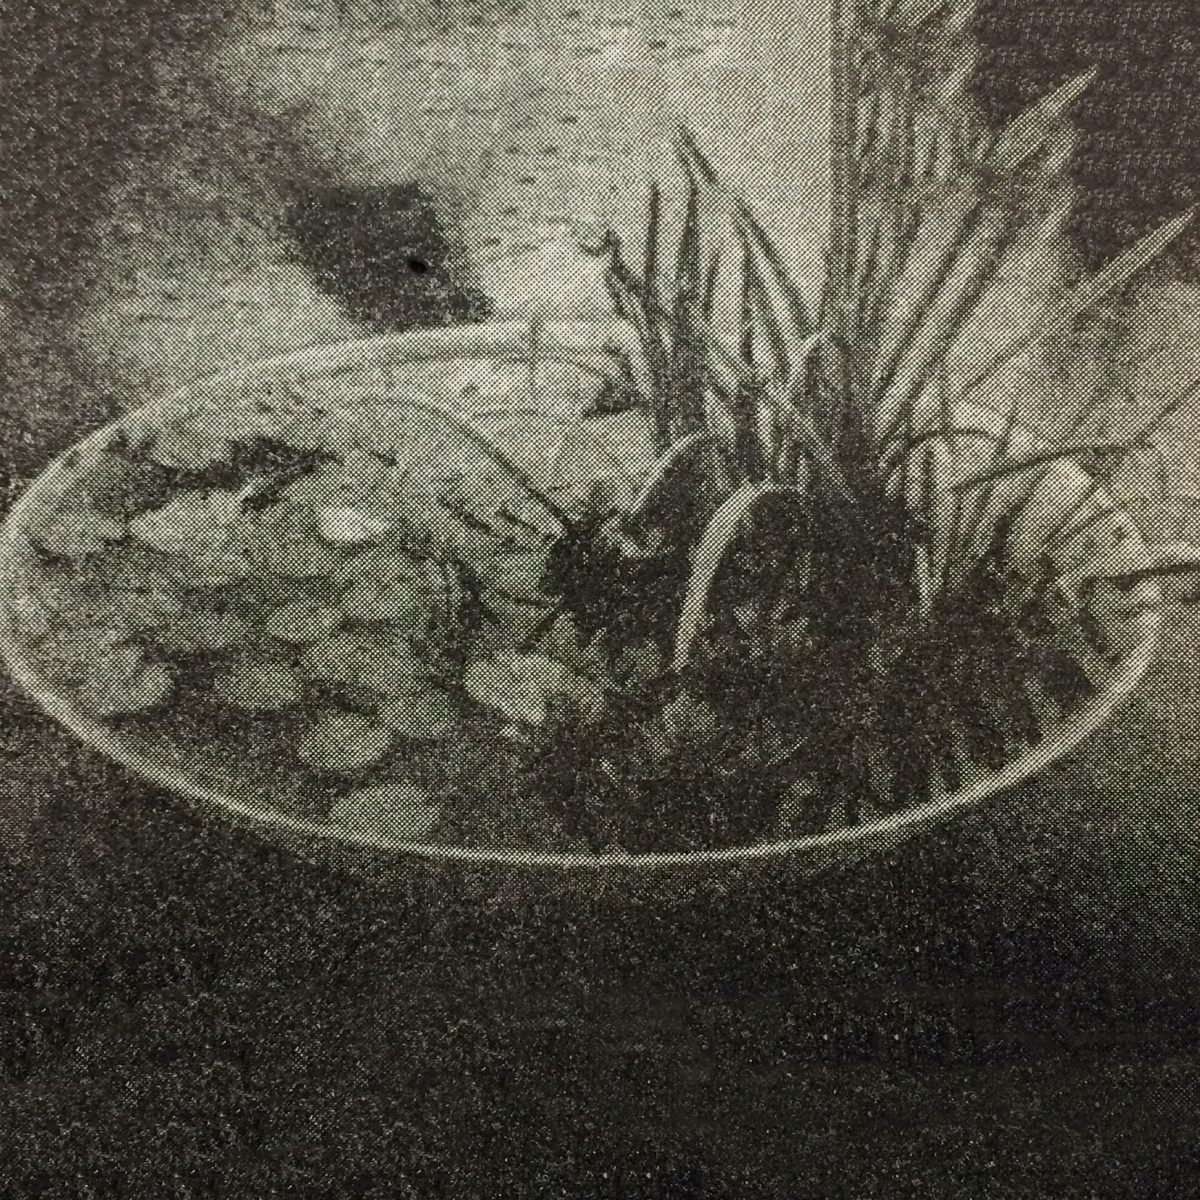 Aquatic plant pot. Witold Szolginia, Aesthetics of the City, Arkady, Warsaw 1981; illustration: Archive of the Institute of Urban Planning and Architecture [background modified].